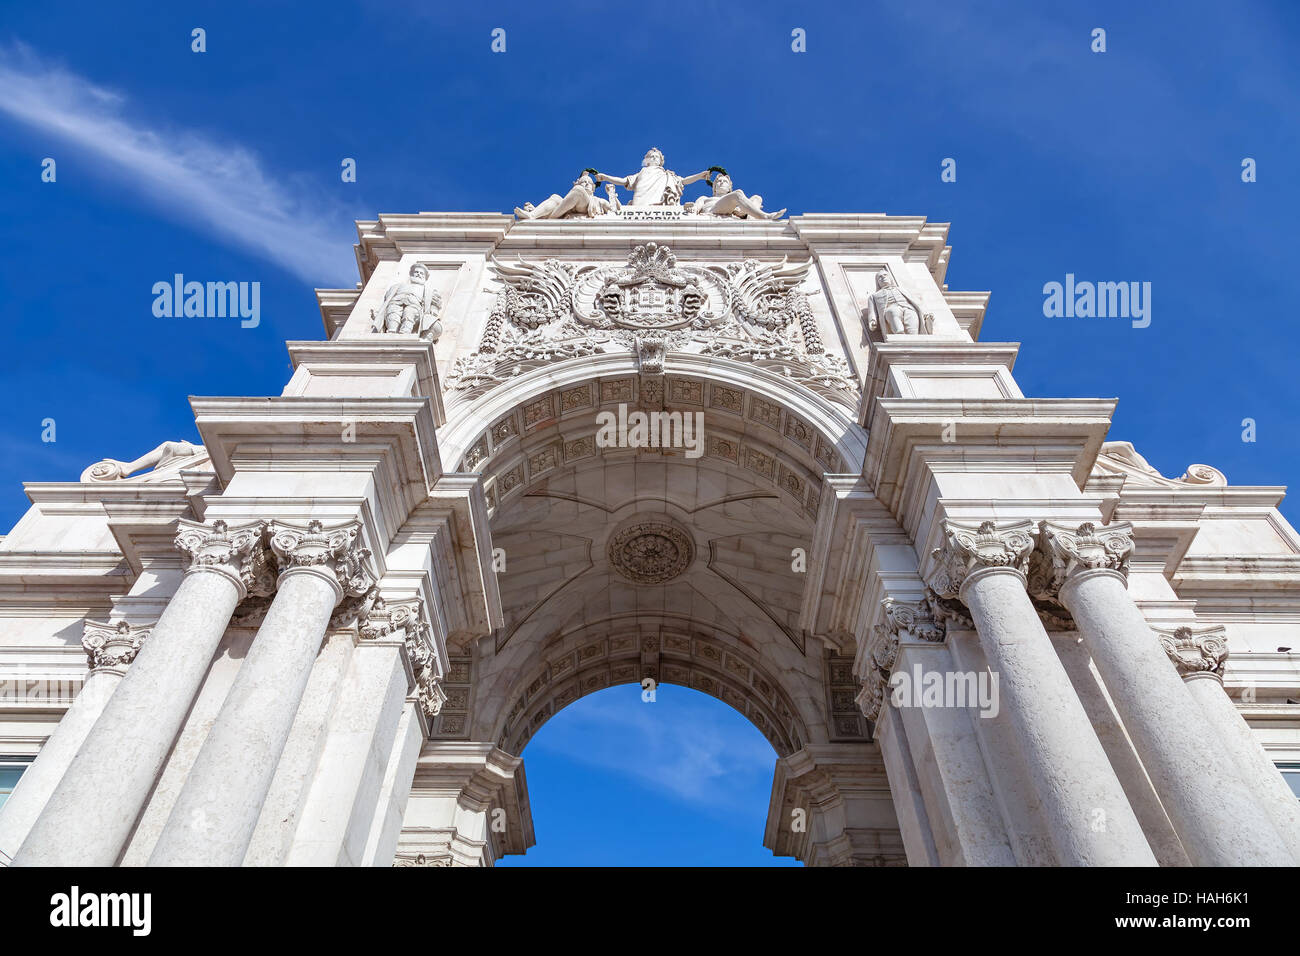 Lisbon, Portugal. Looking up at the Augusta Street Triumphal Arch in the Commerce Square, Praca do Comercio or Terreiro do Paco. Stock Photo